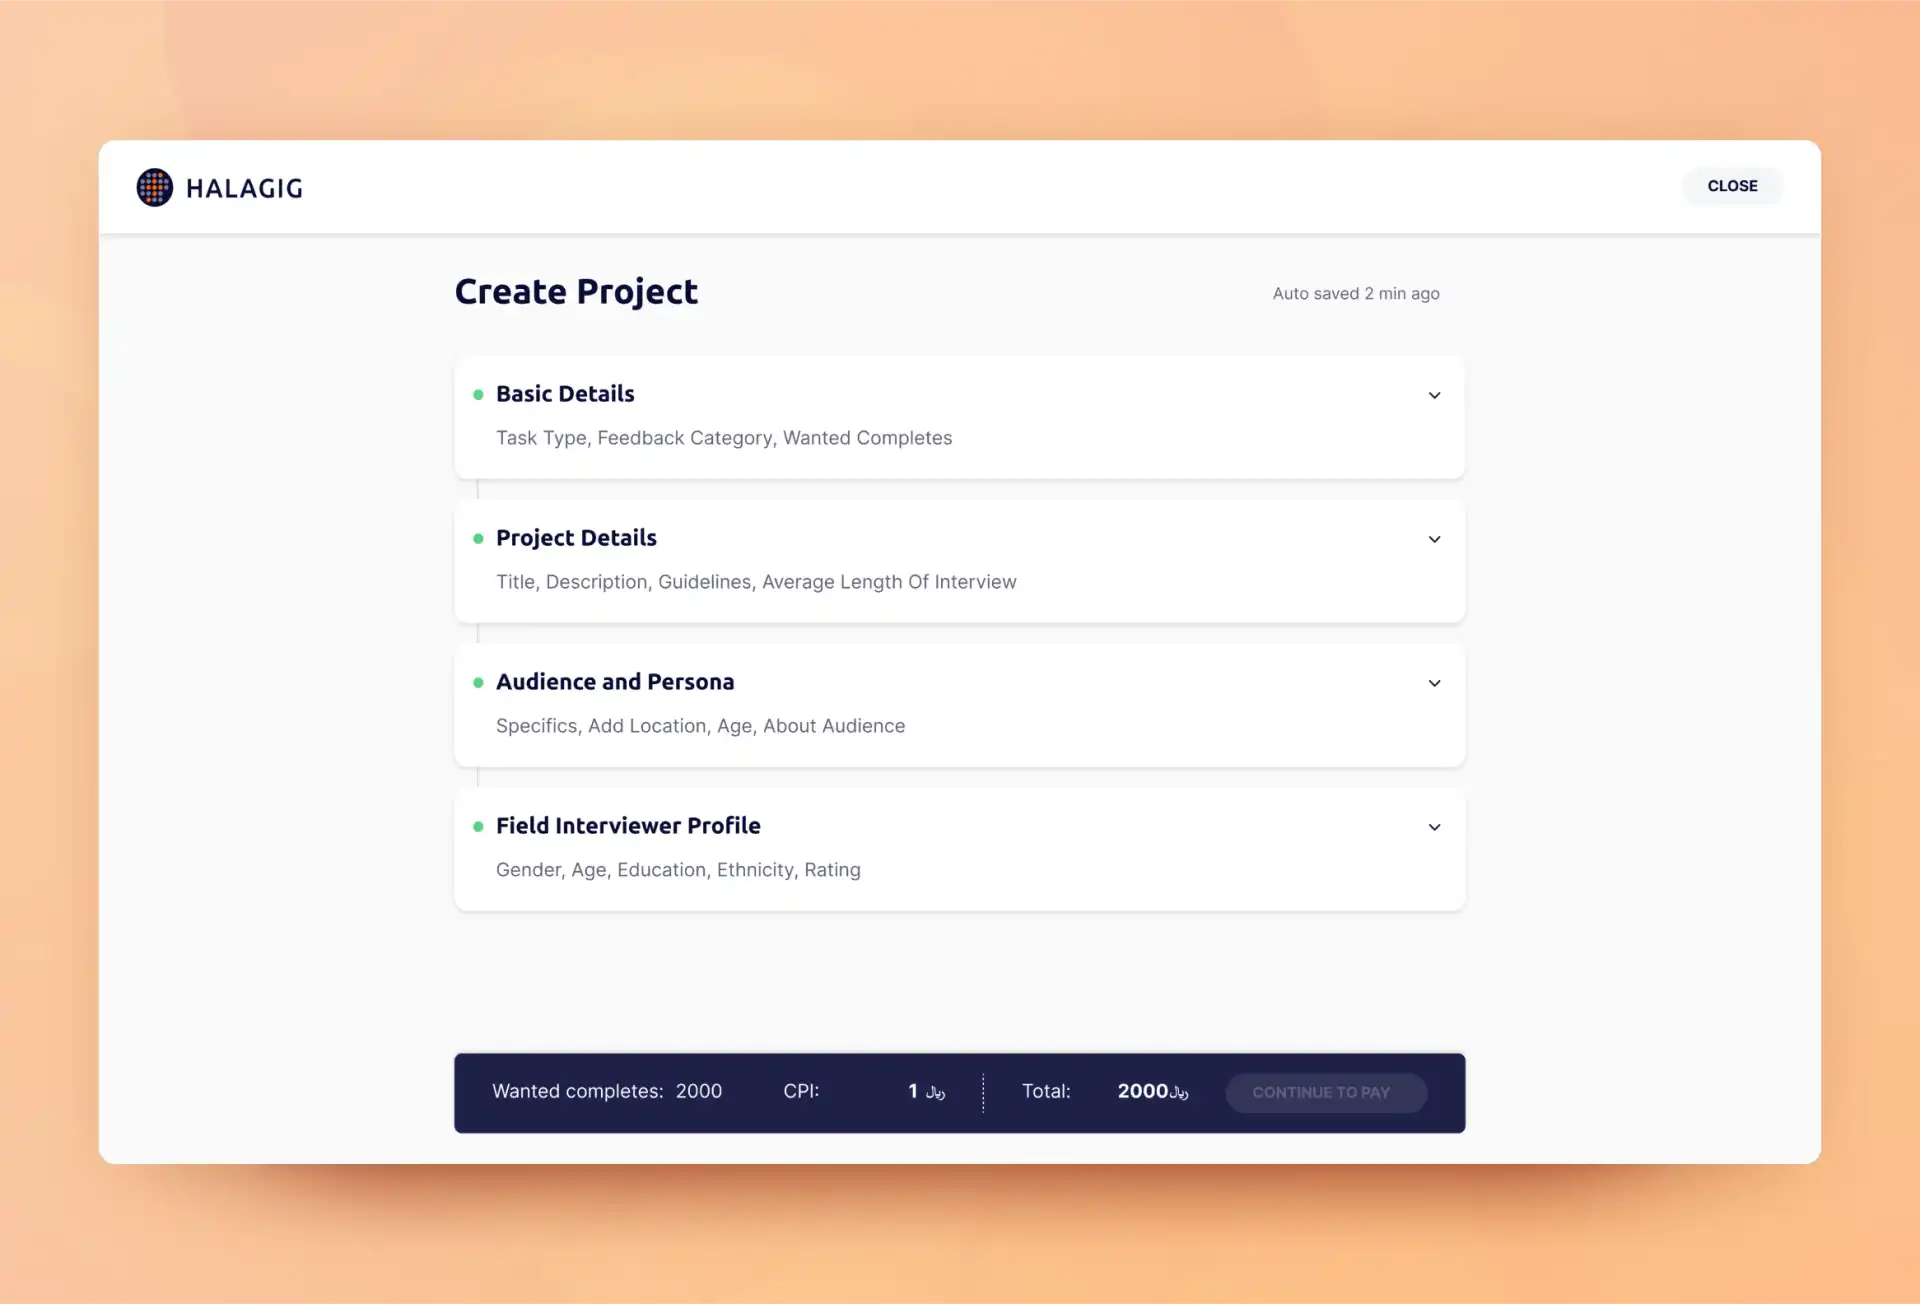 UI UX design to create project and define project requirements